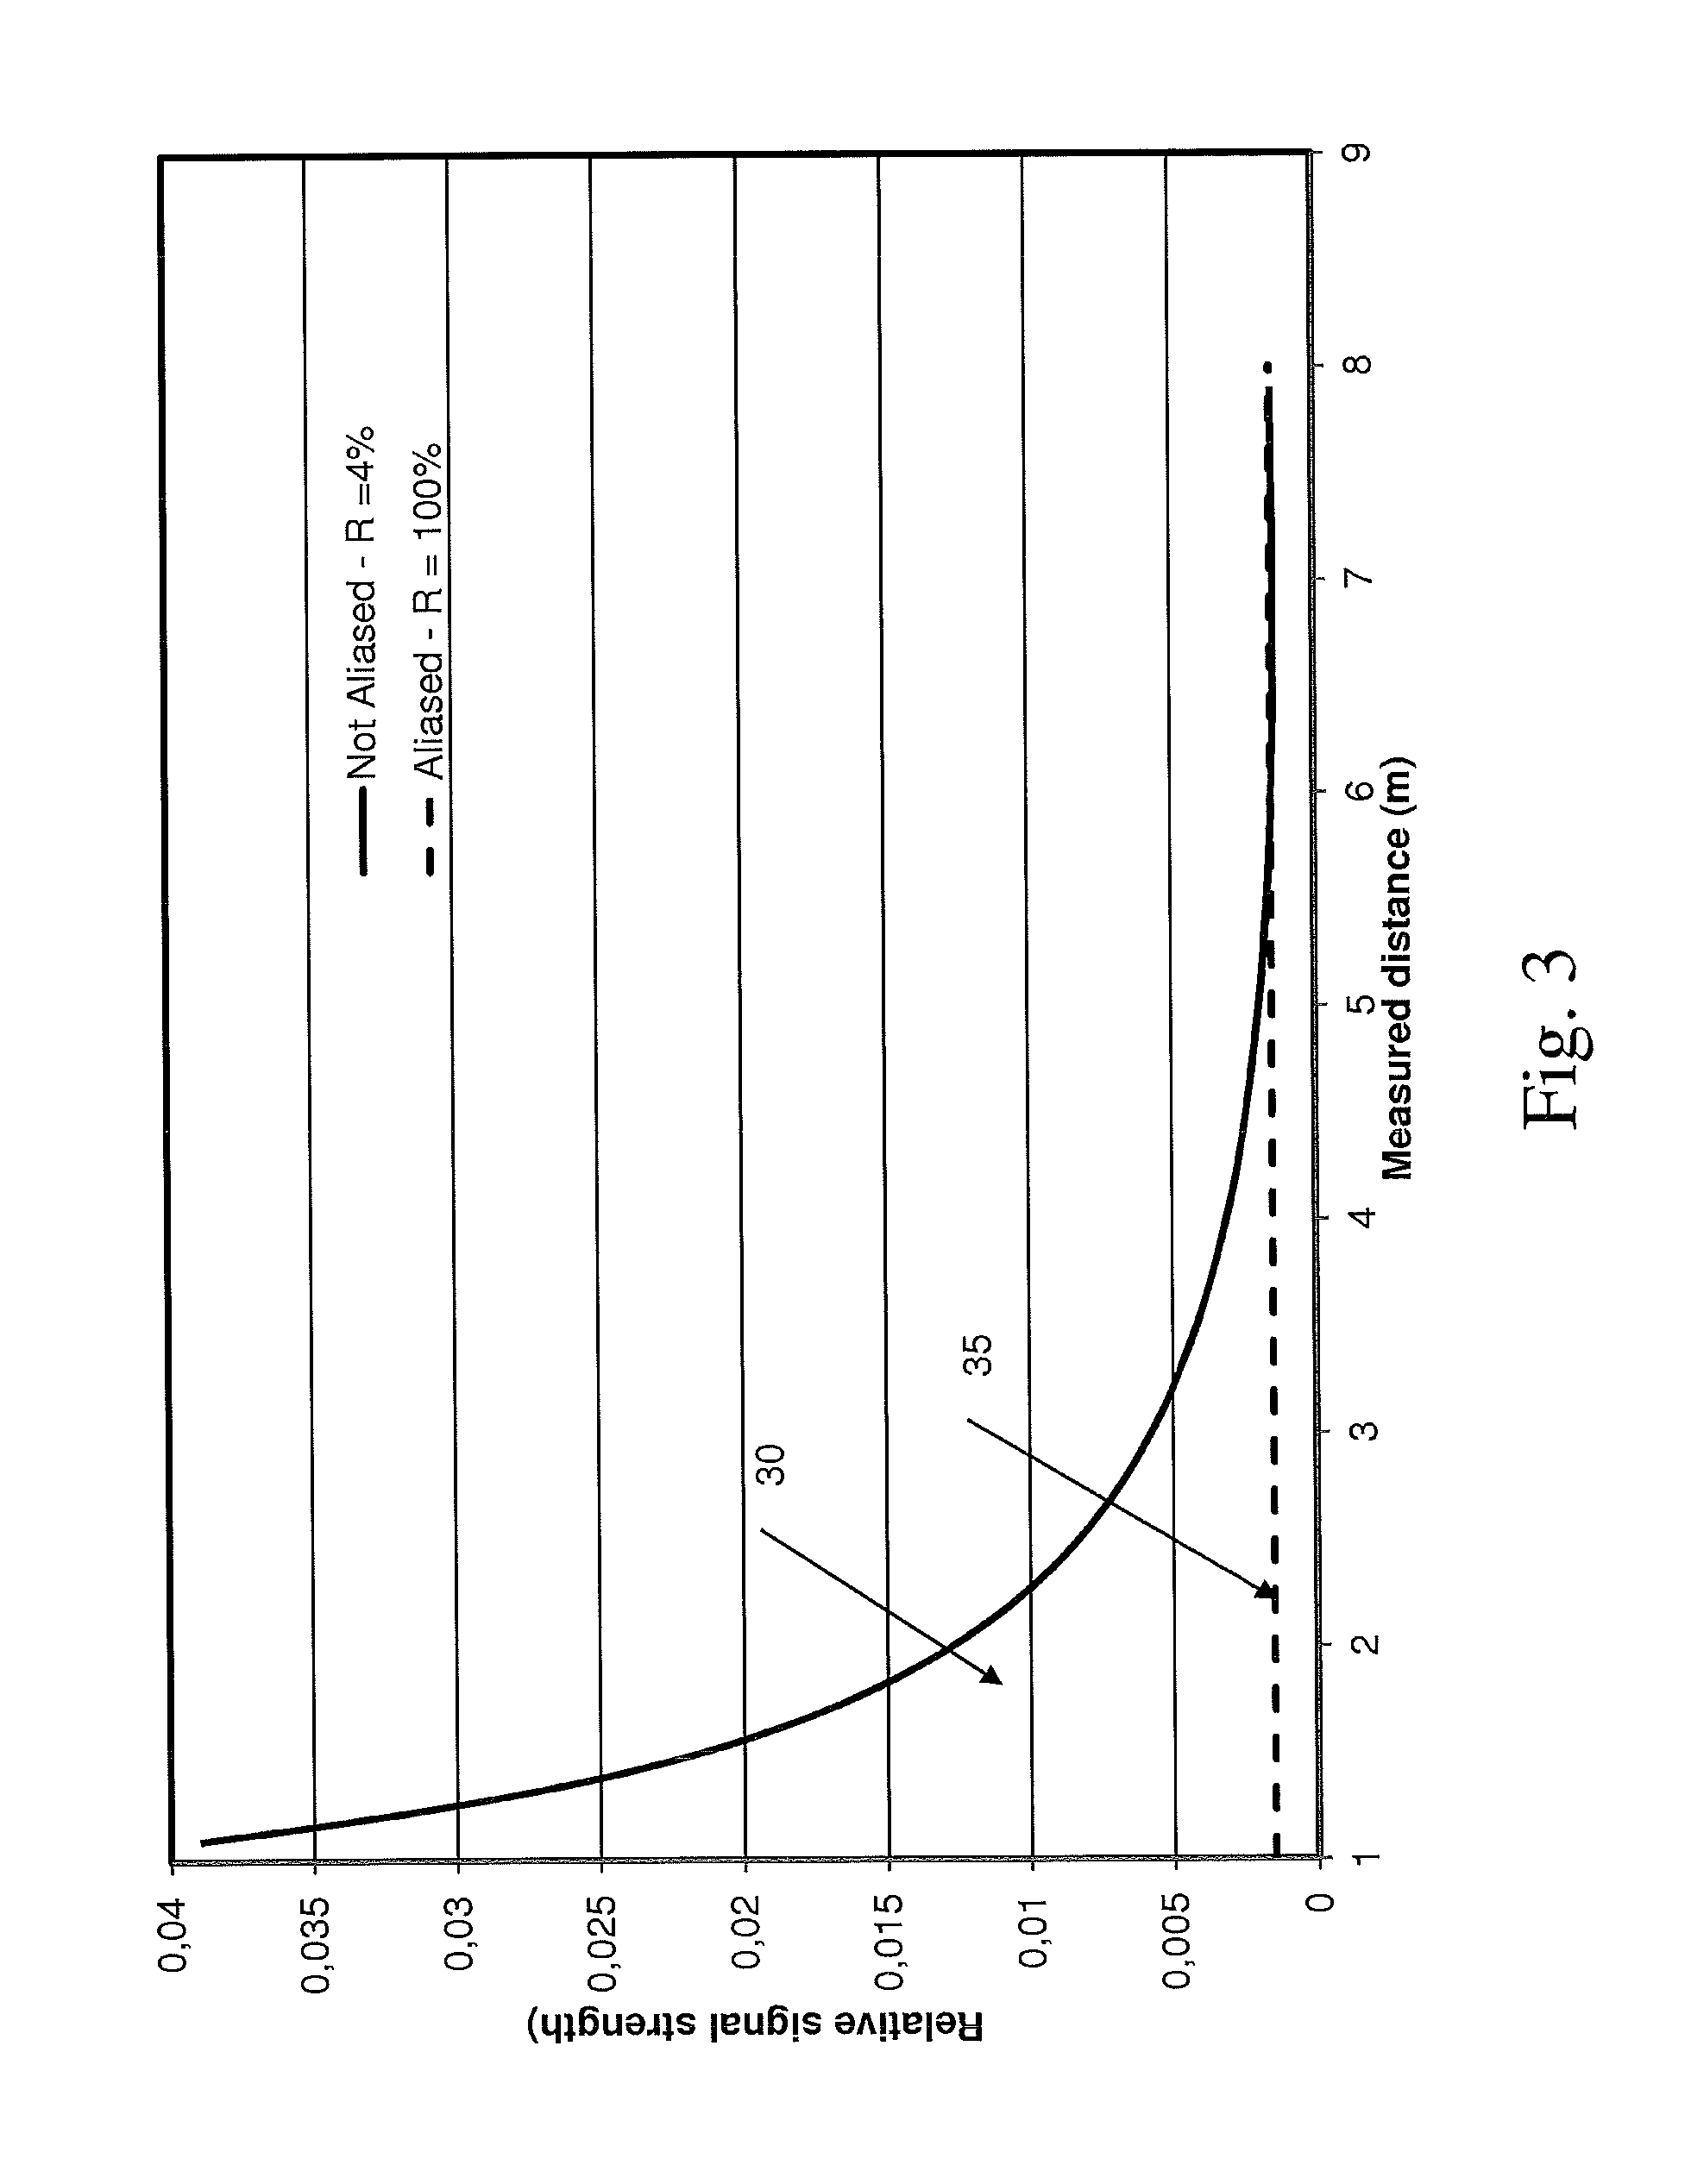 Processing of time-of-flight signals